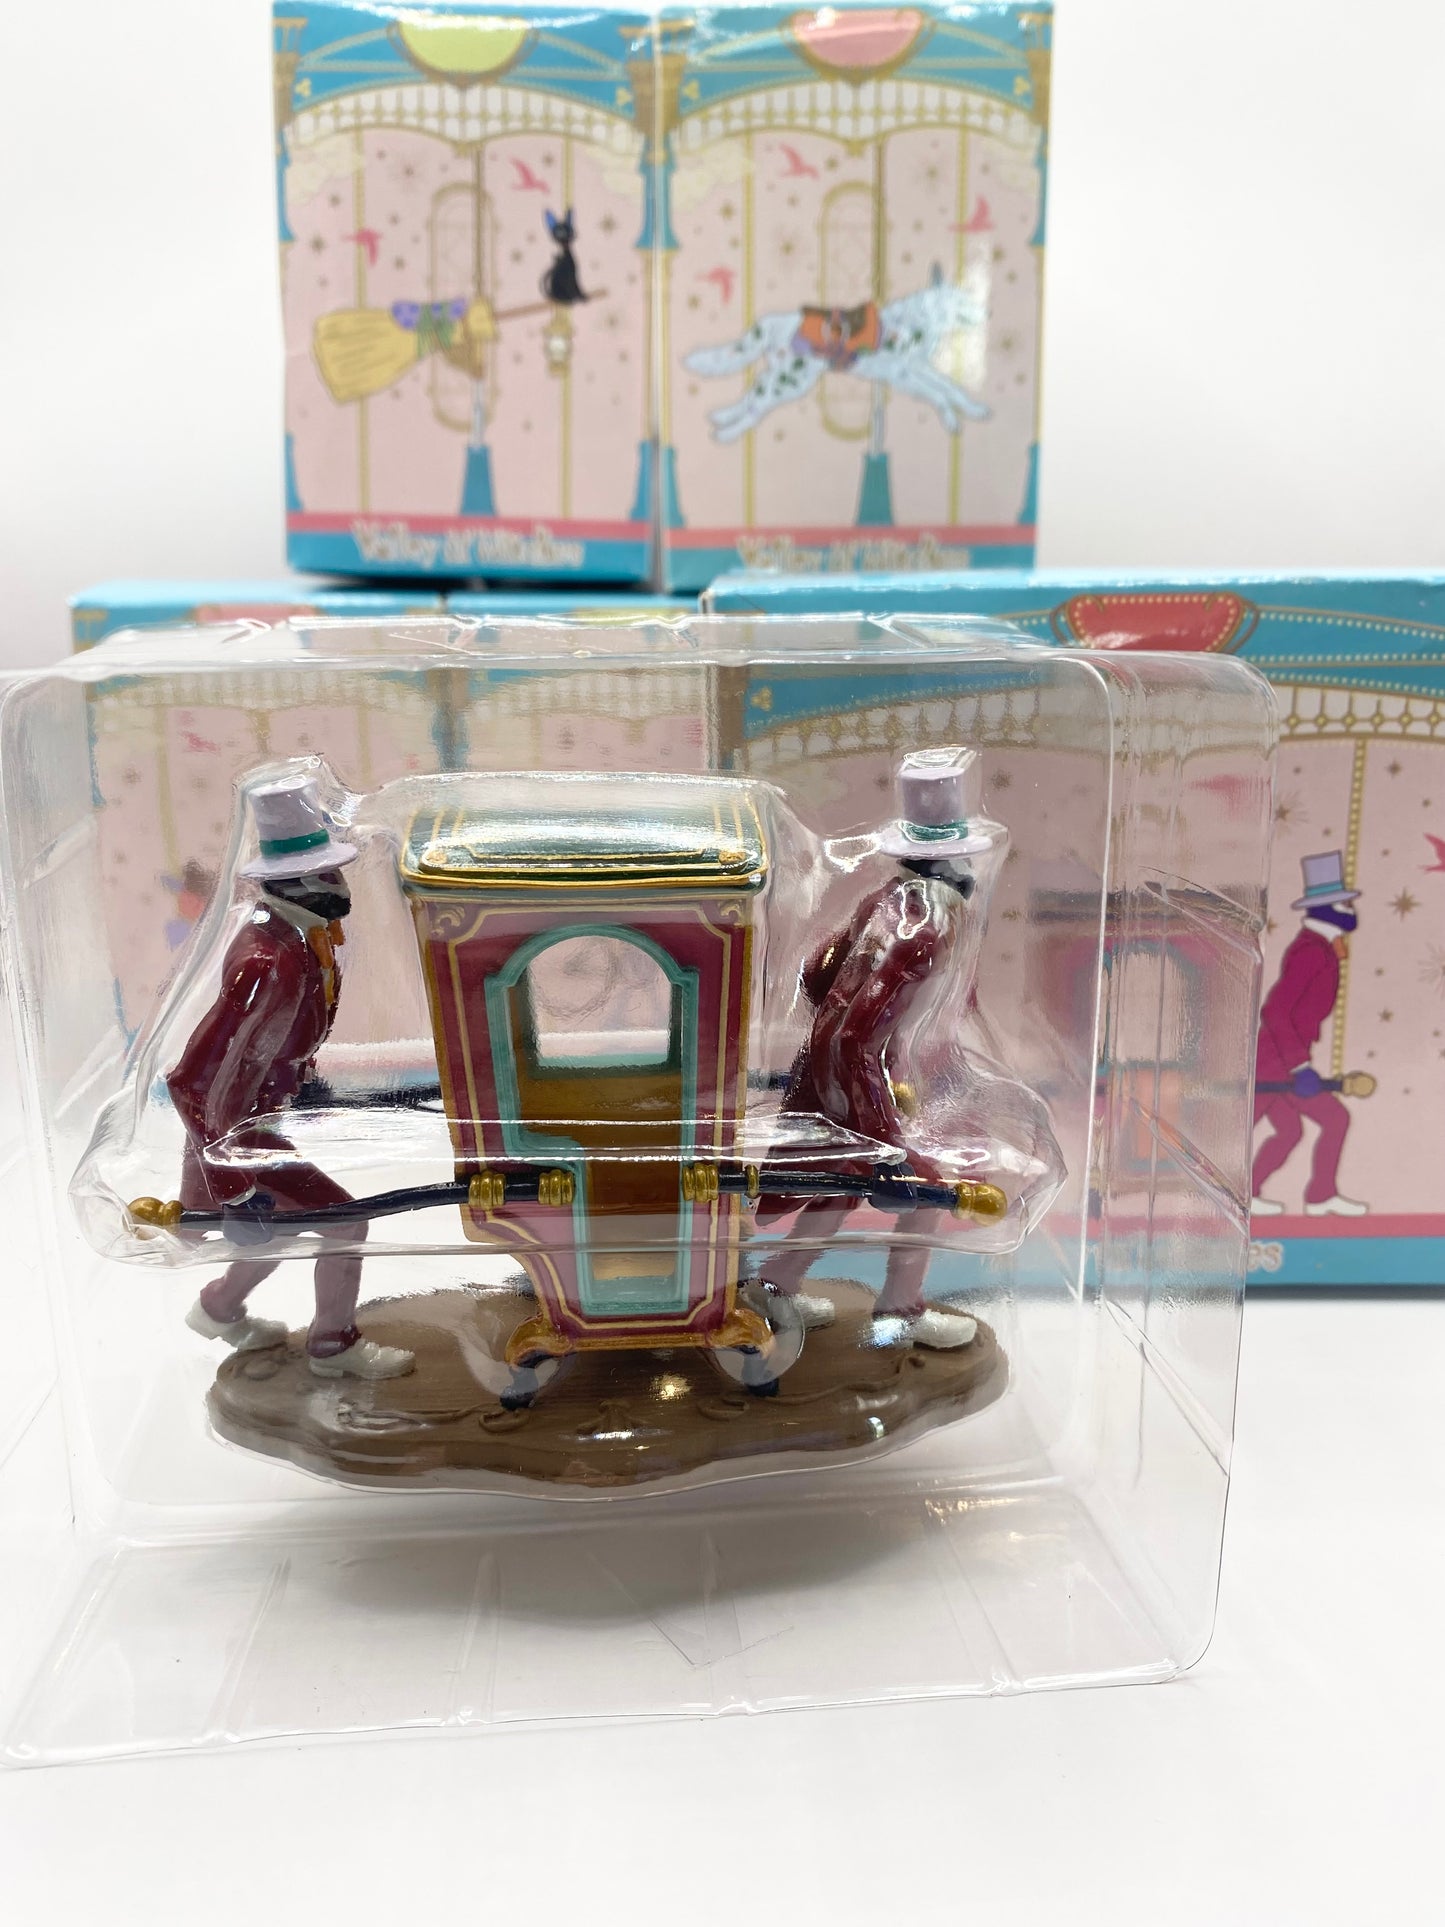 Studio Ghibli - Ghibli Park - ‘Valley of Witches - Merry Go Round Collection’ 6 Piece